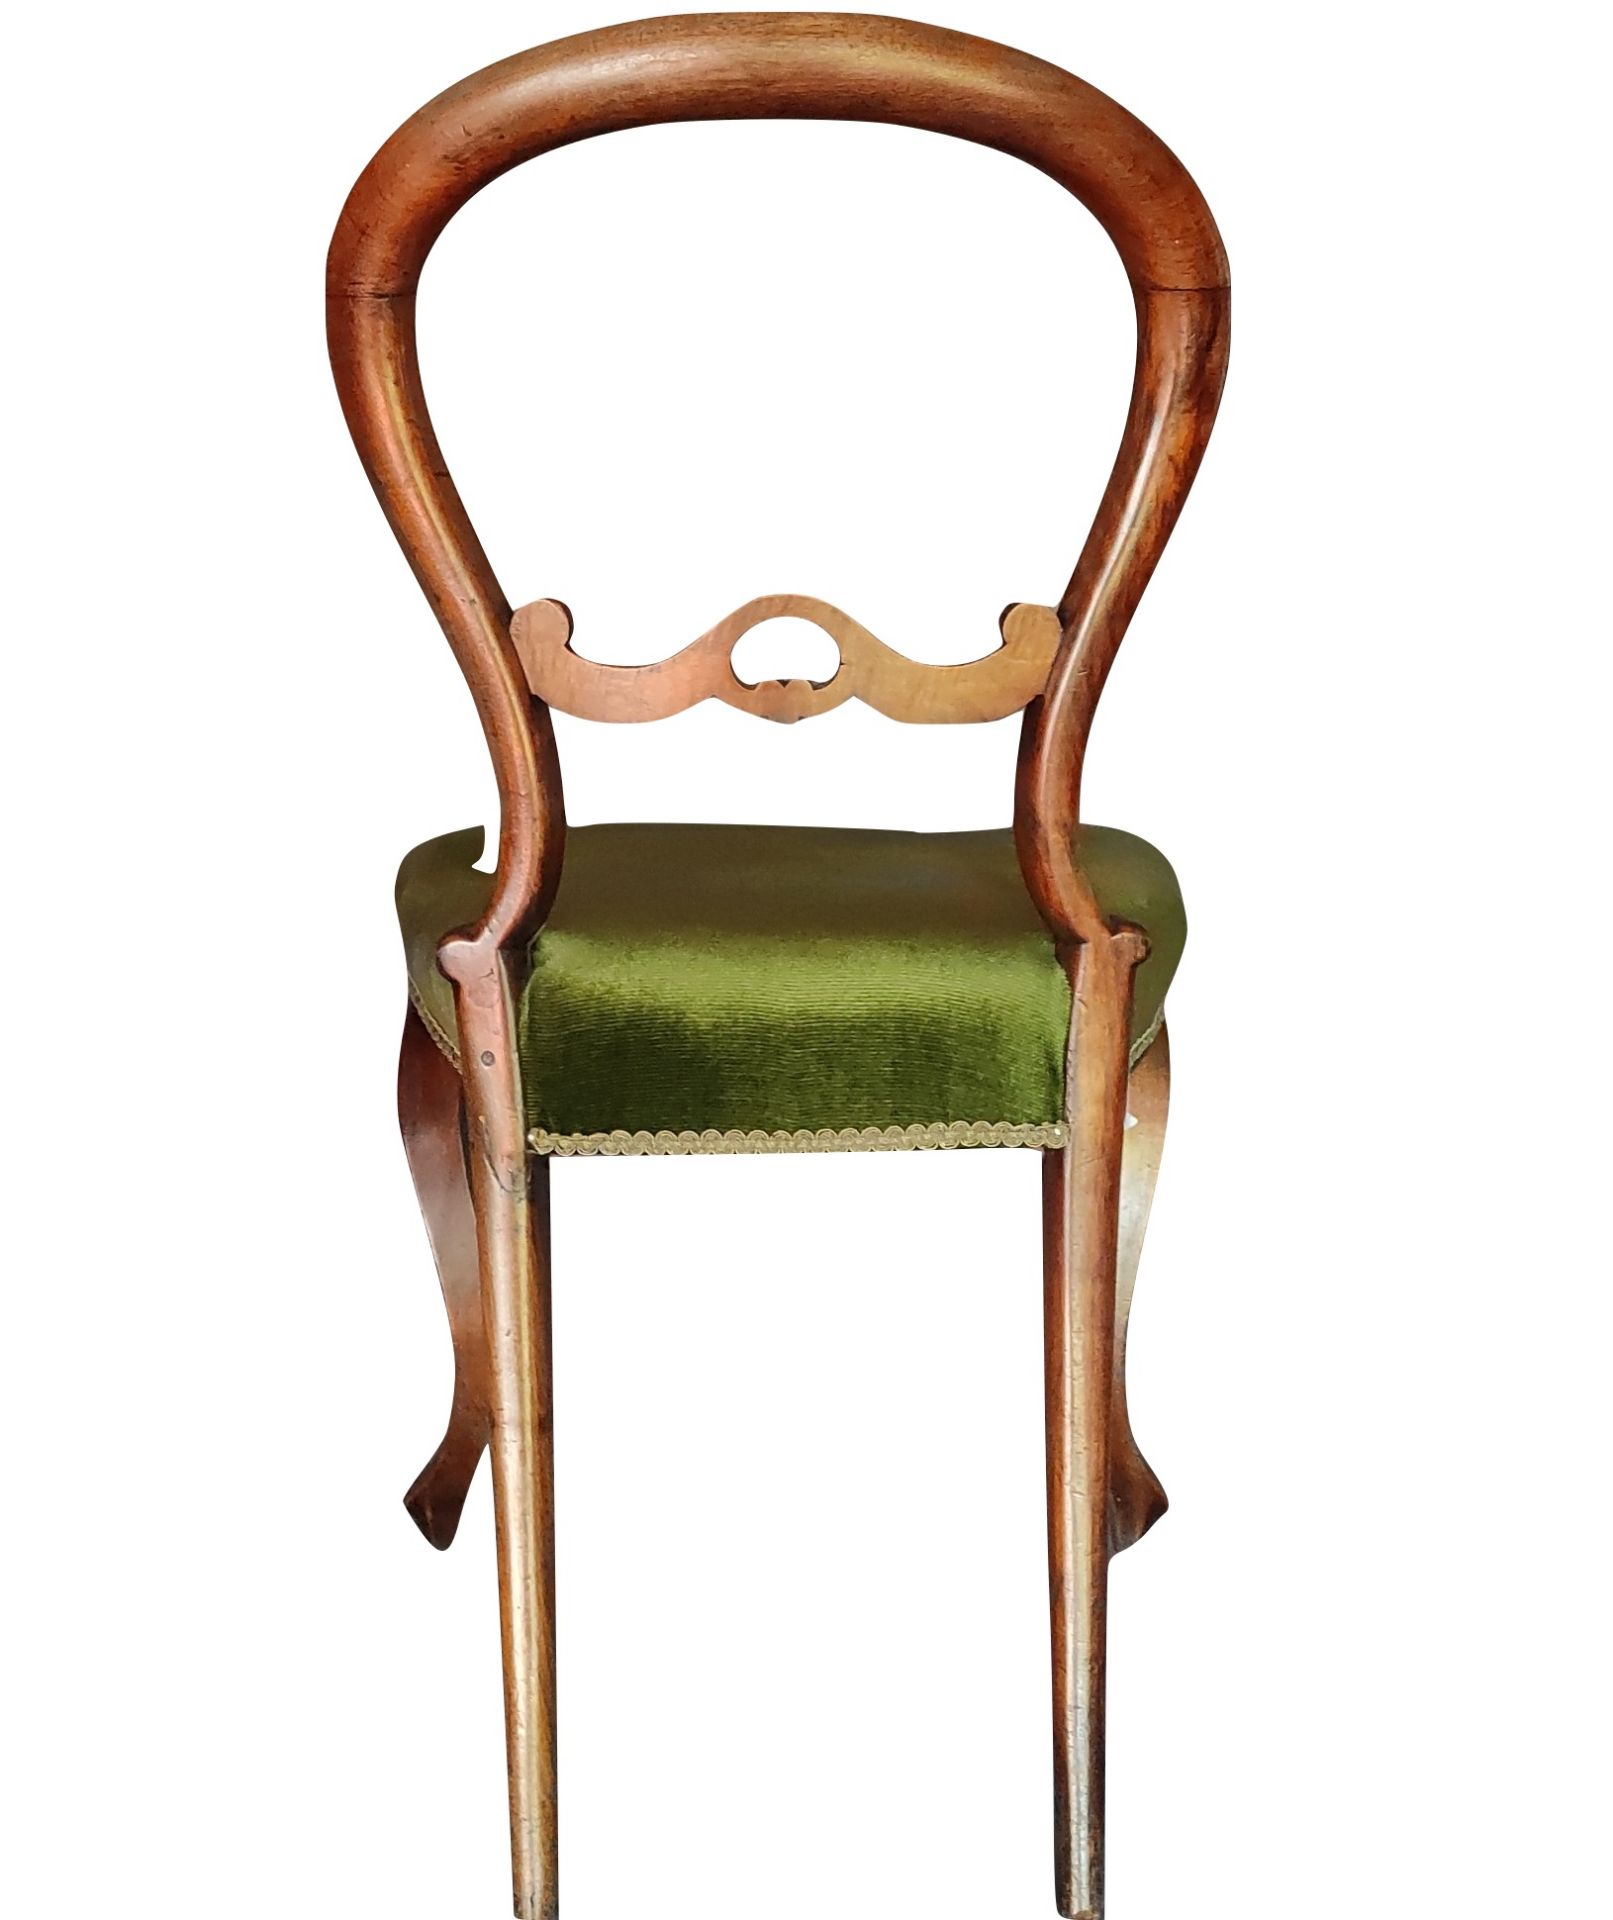 Ornamental side chair, Viennese Baroque, openwork and curved backrest, front legs curved with indic - Image 2 of 3